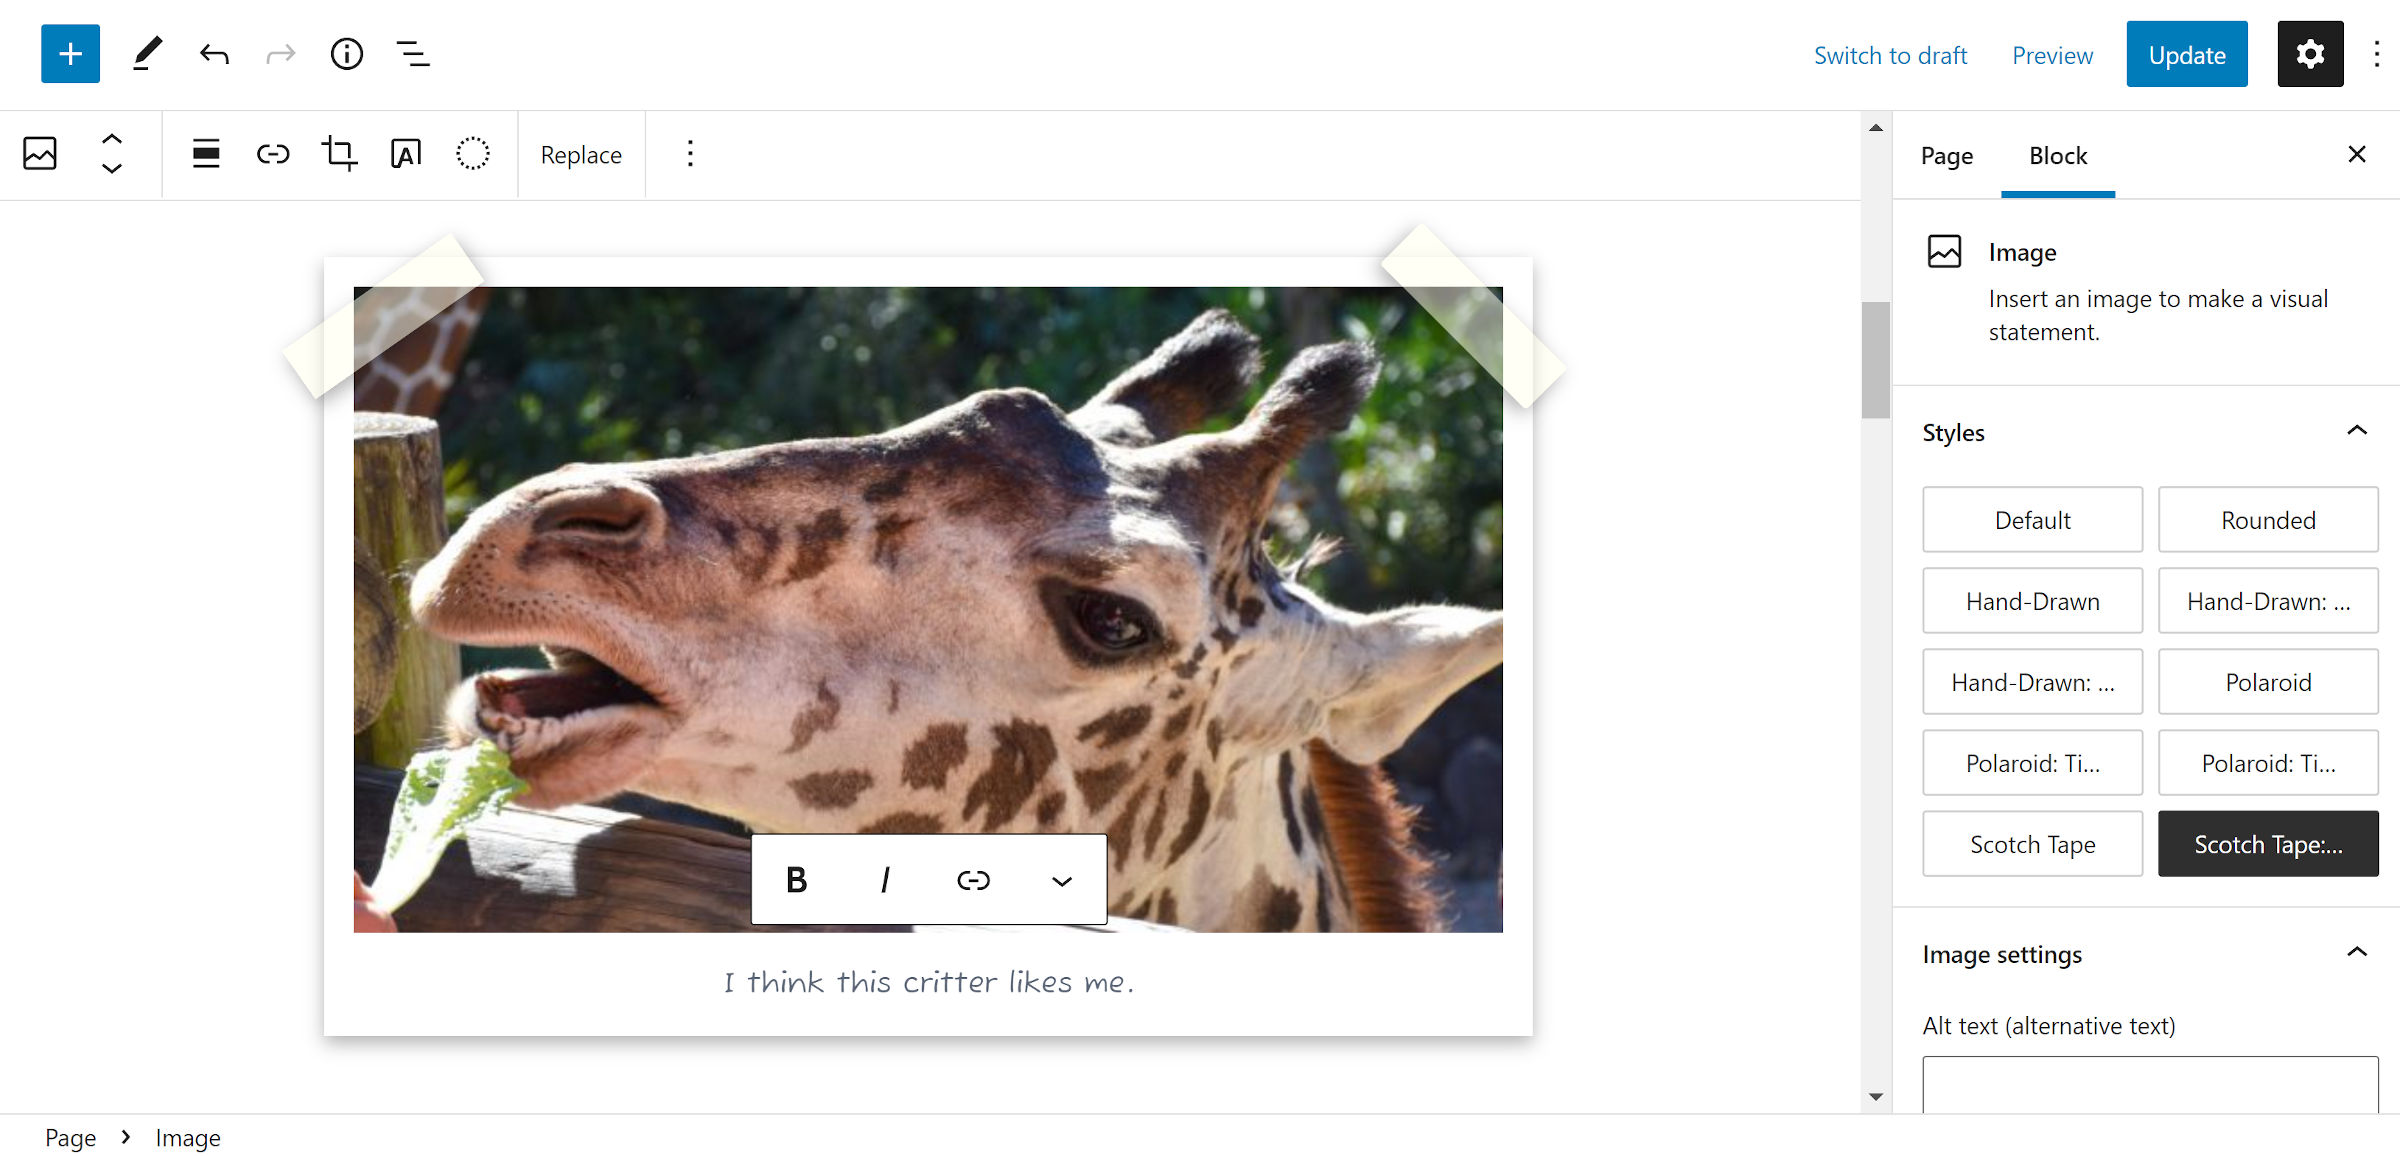 Photo of a giraffe in a Polaroid-style frame with Scotch tape holding it at the top corners.  This is presented in the WordPress block editor.